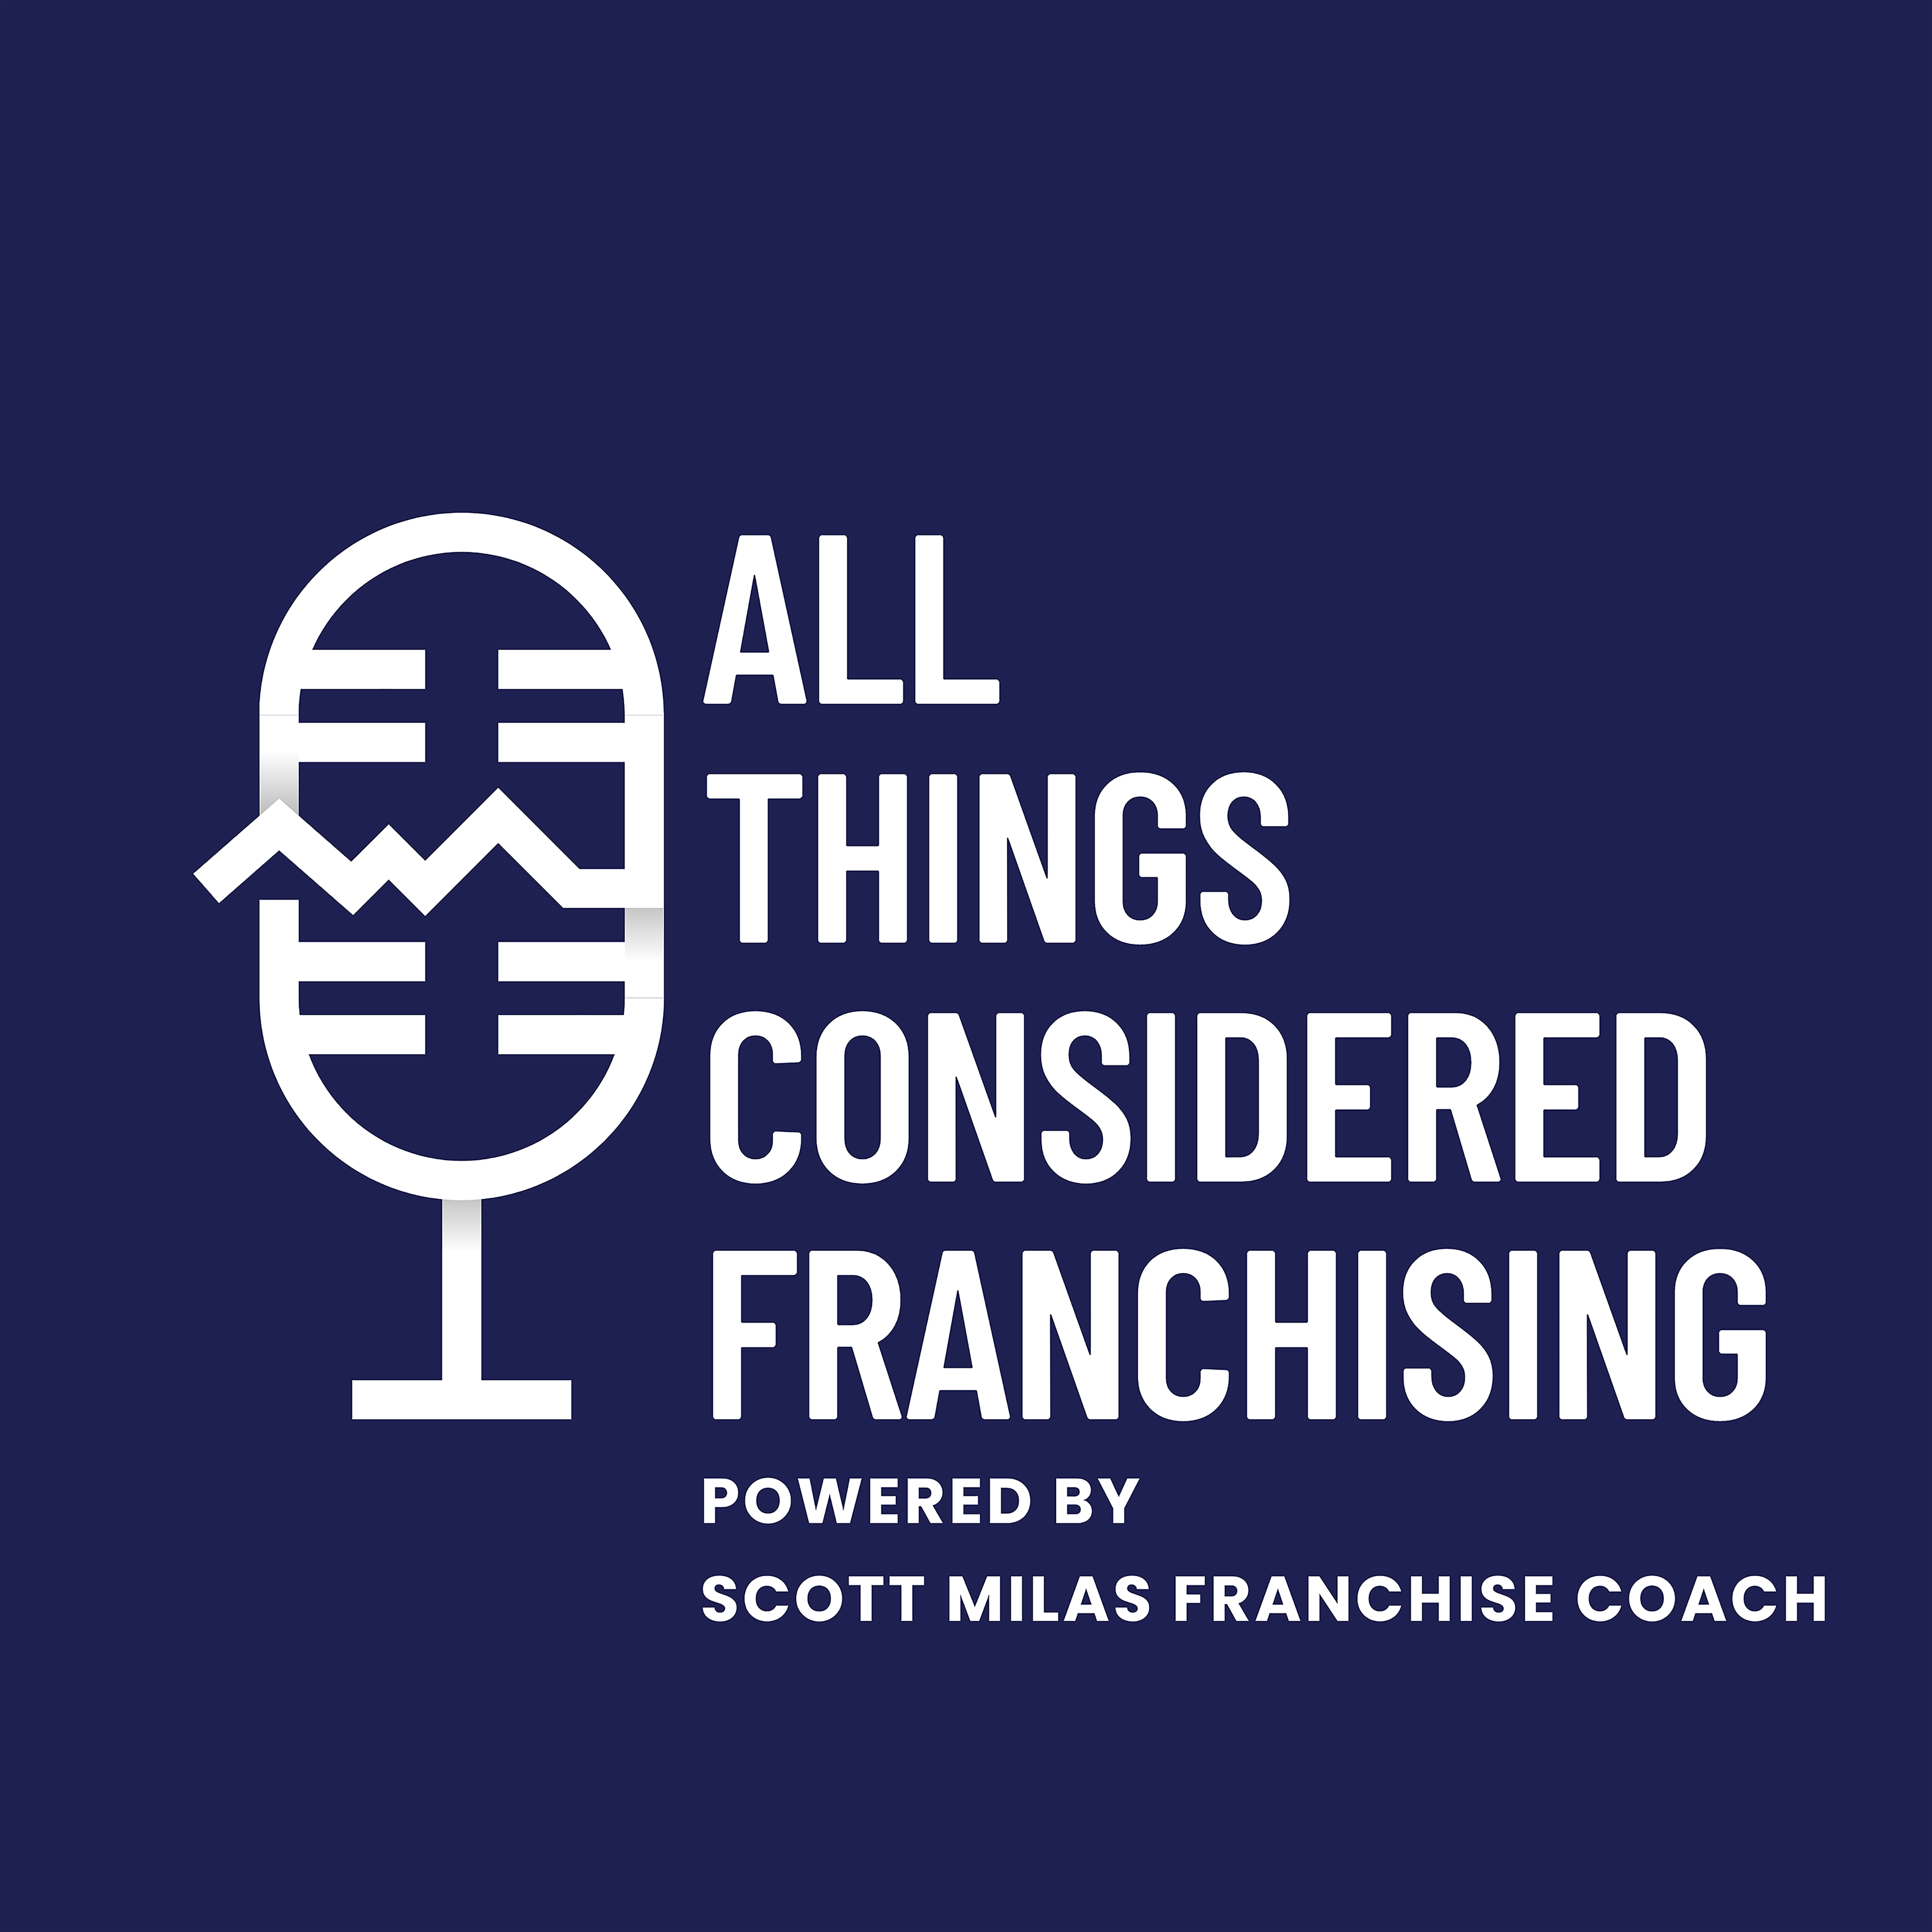 Scotty Milas' All Things Considered Franchising Podcast with Dustin & Alison Braune of iTRIP Vacations